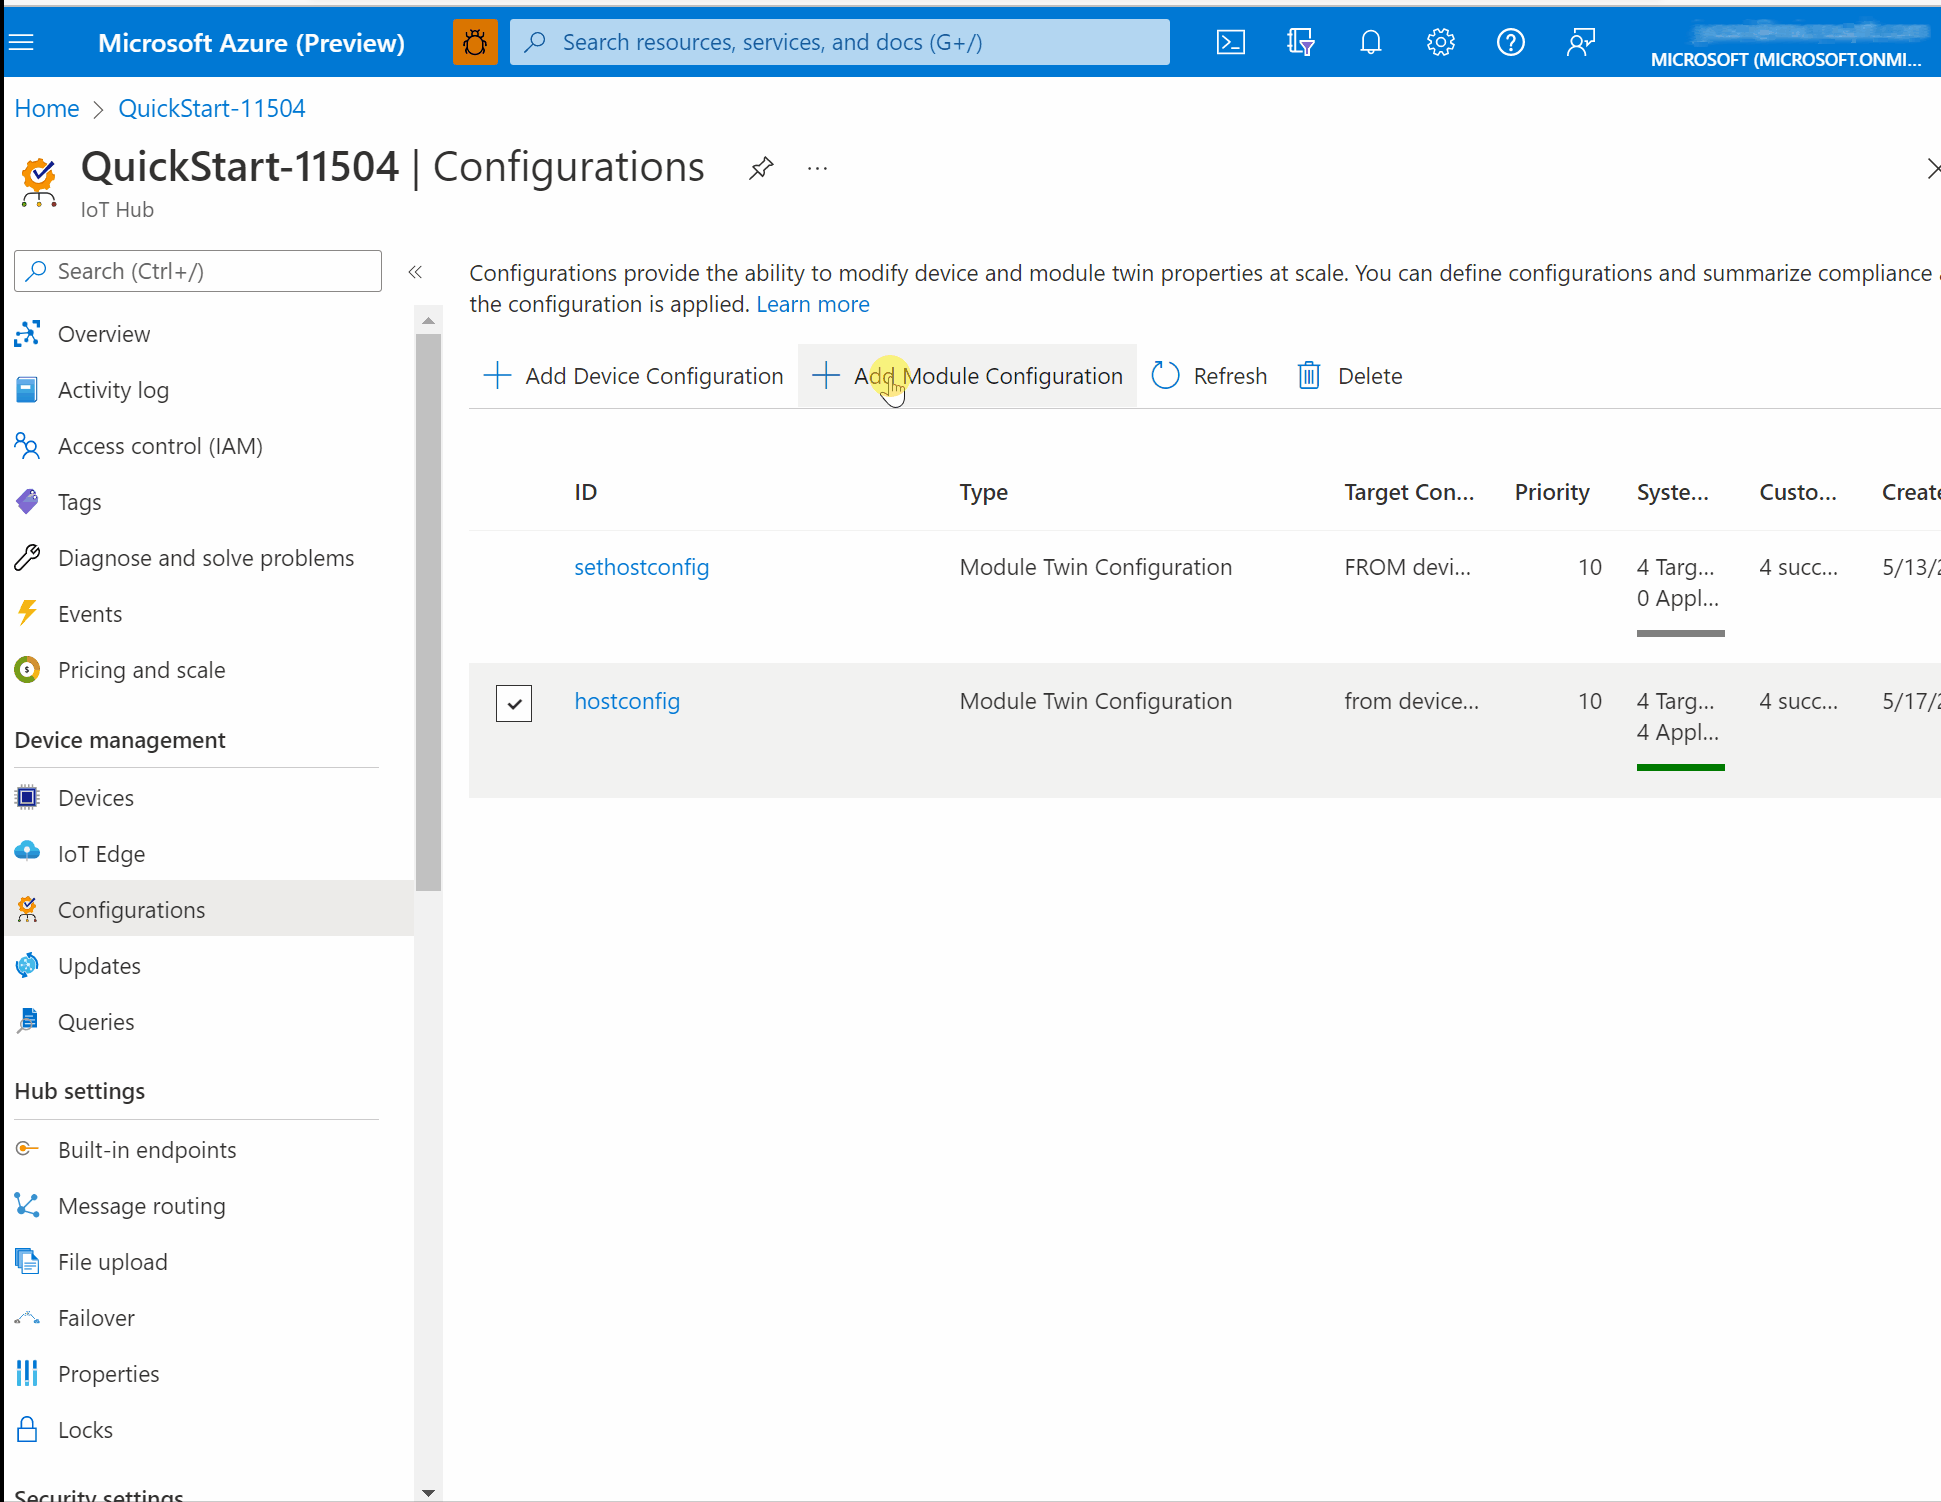 Screen capture showing creation of a Configuration from Azure Portal with PackageManagerConfiguration settings